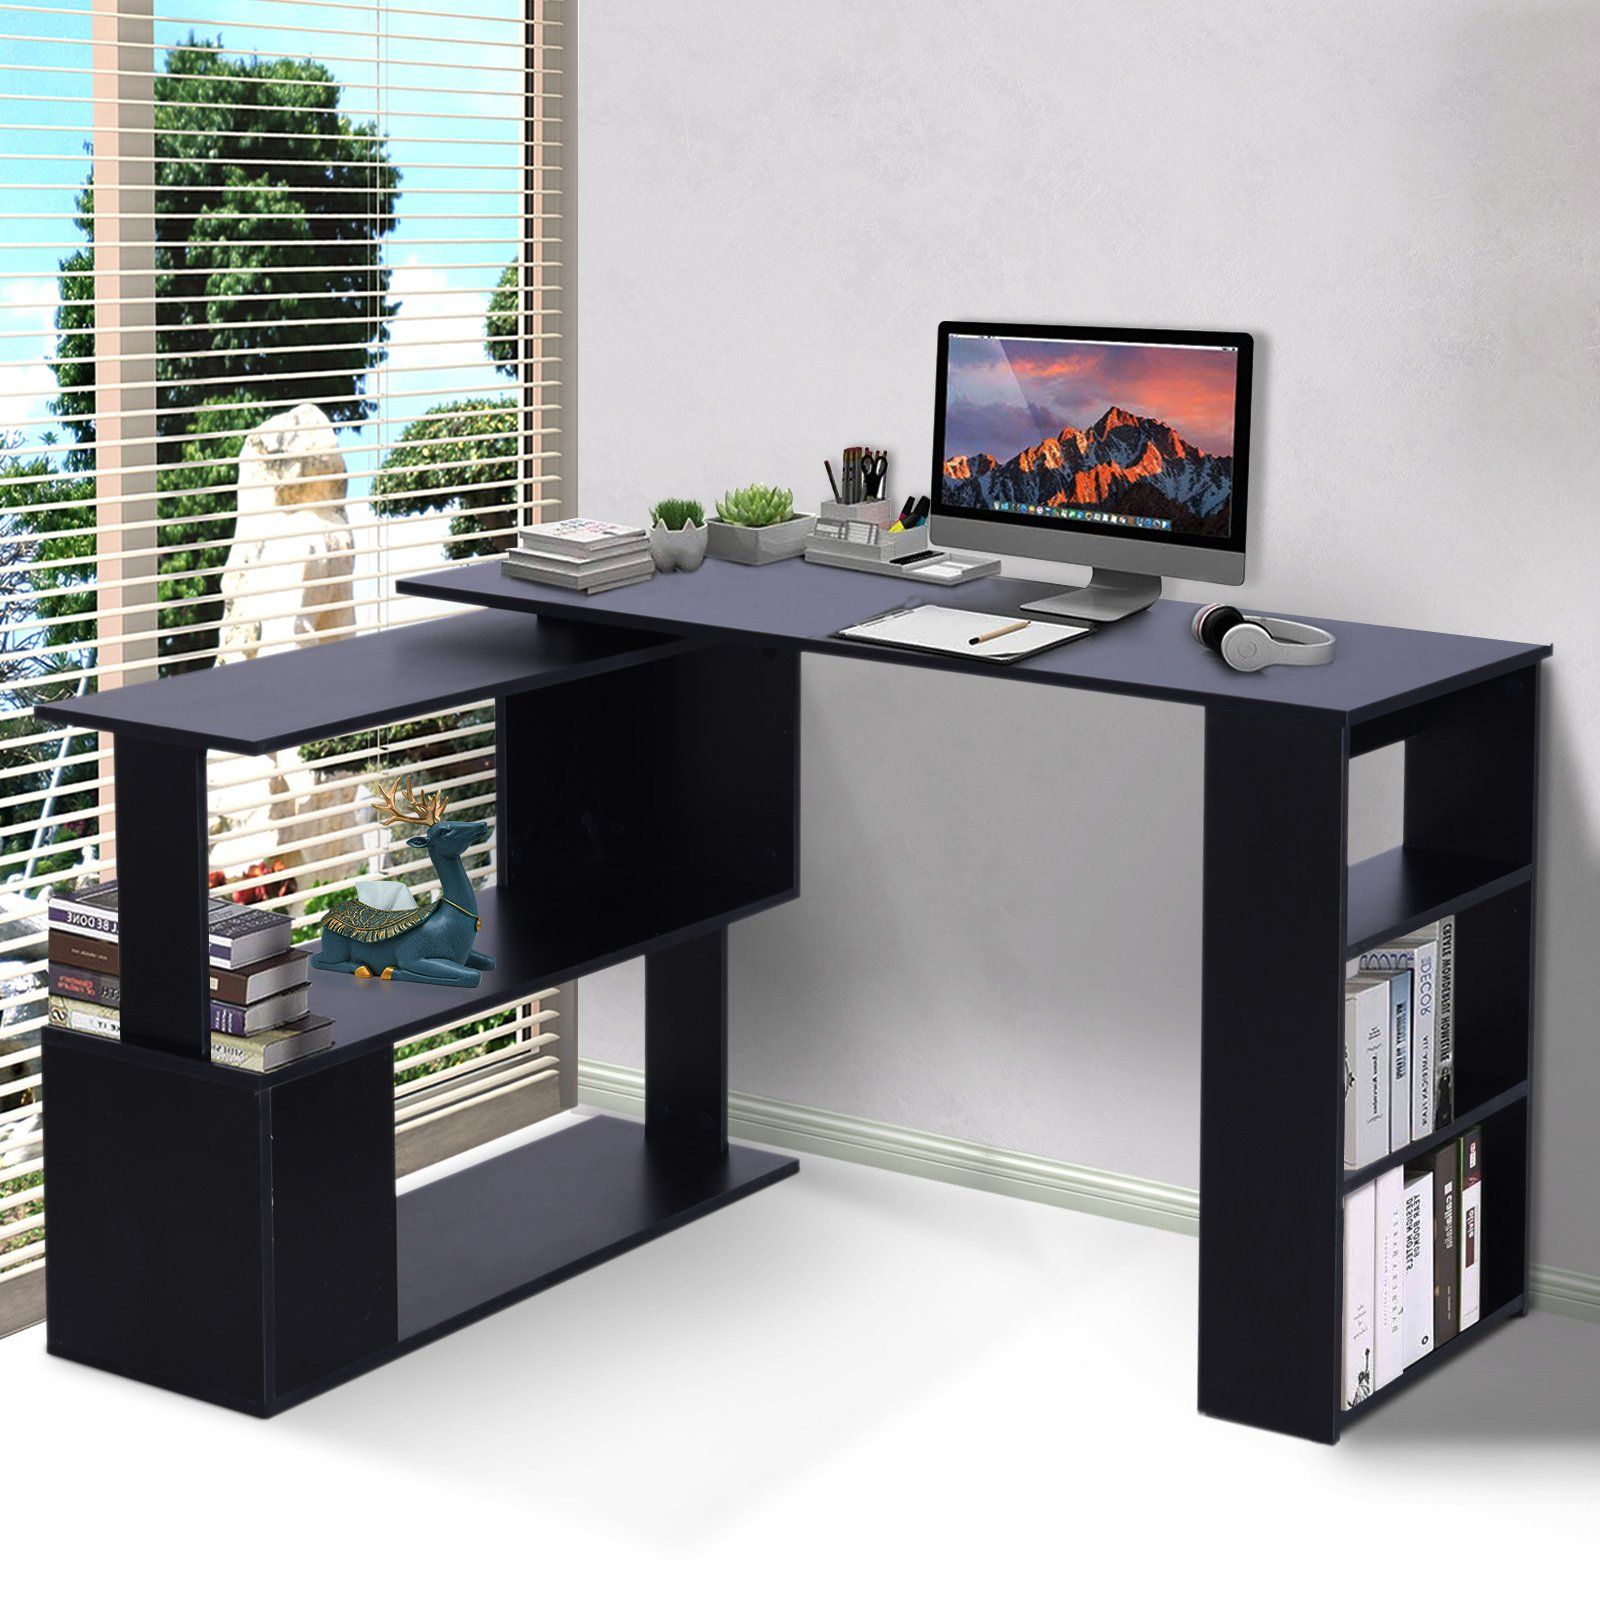 360° Rotating Home Office Corner Desk And Storage Shelf Combo – Black With Regard To Black And Cinnamon Office Desks (View 5 of 15)